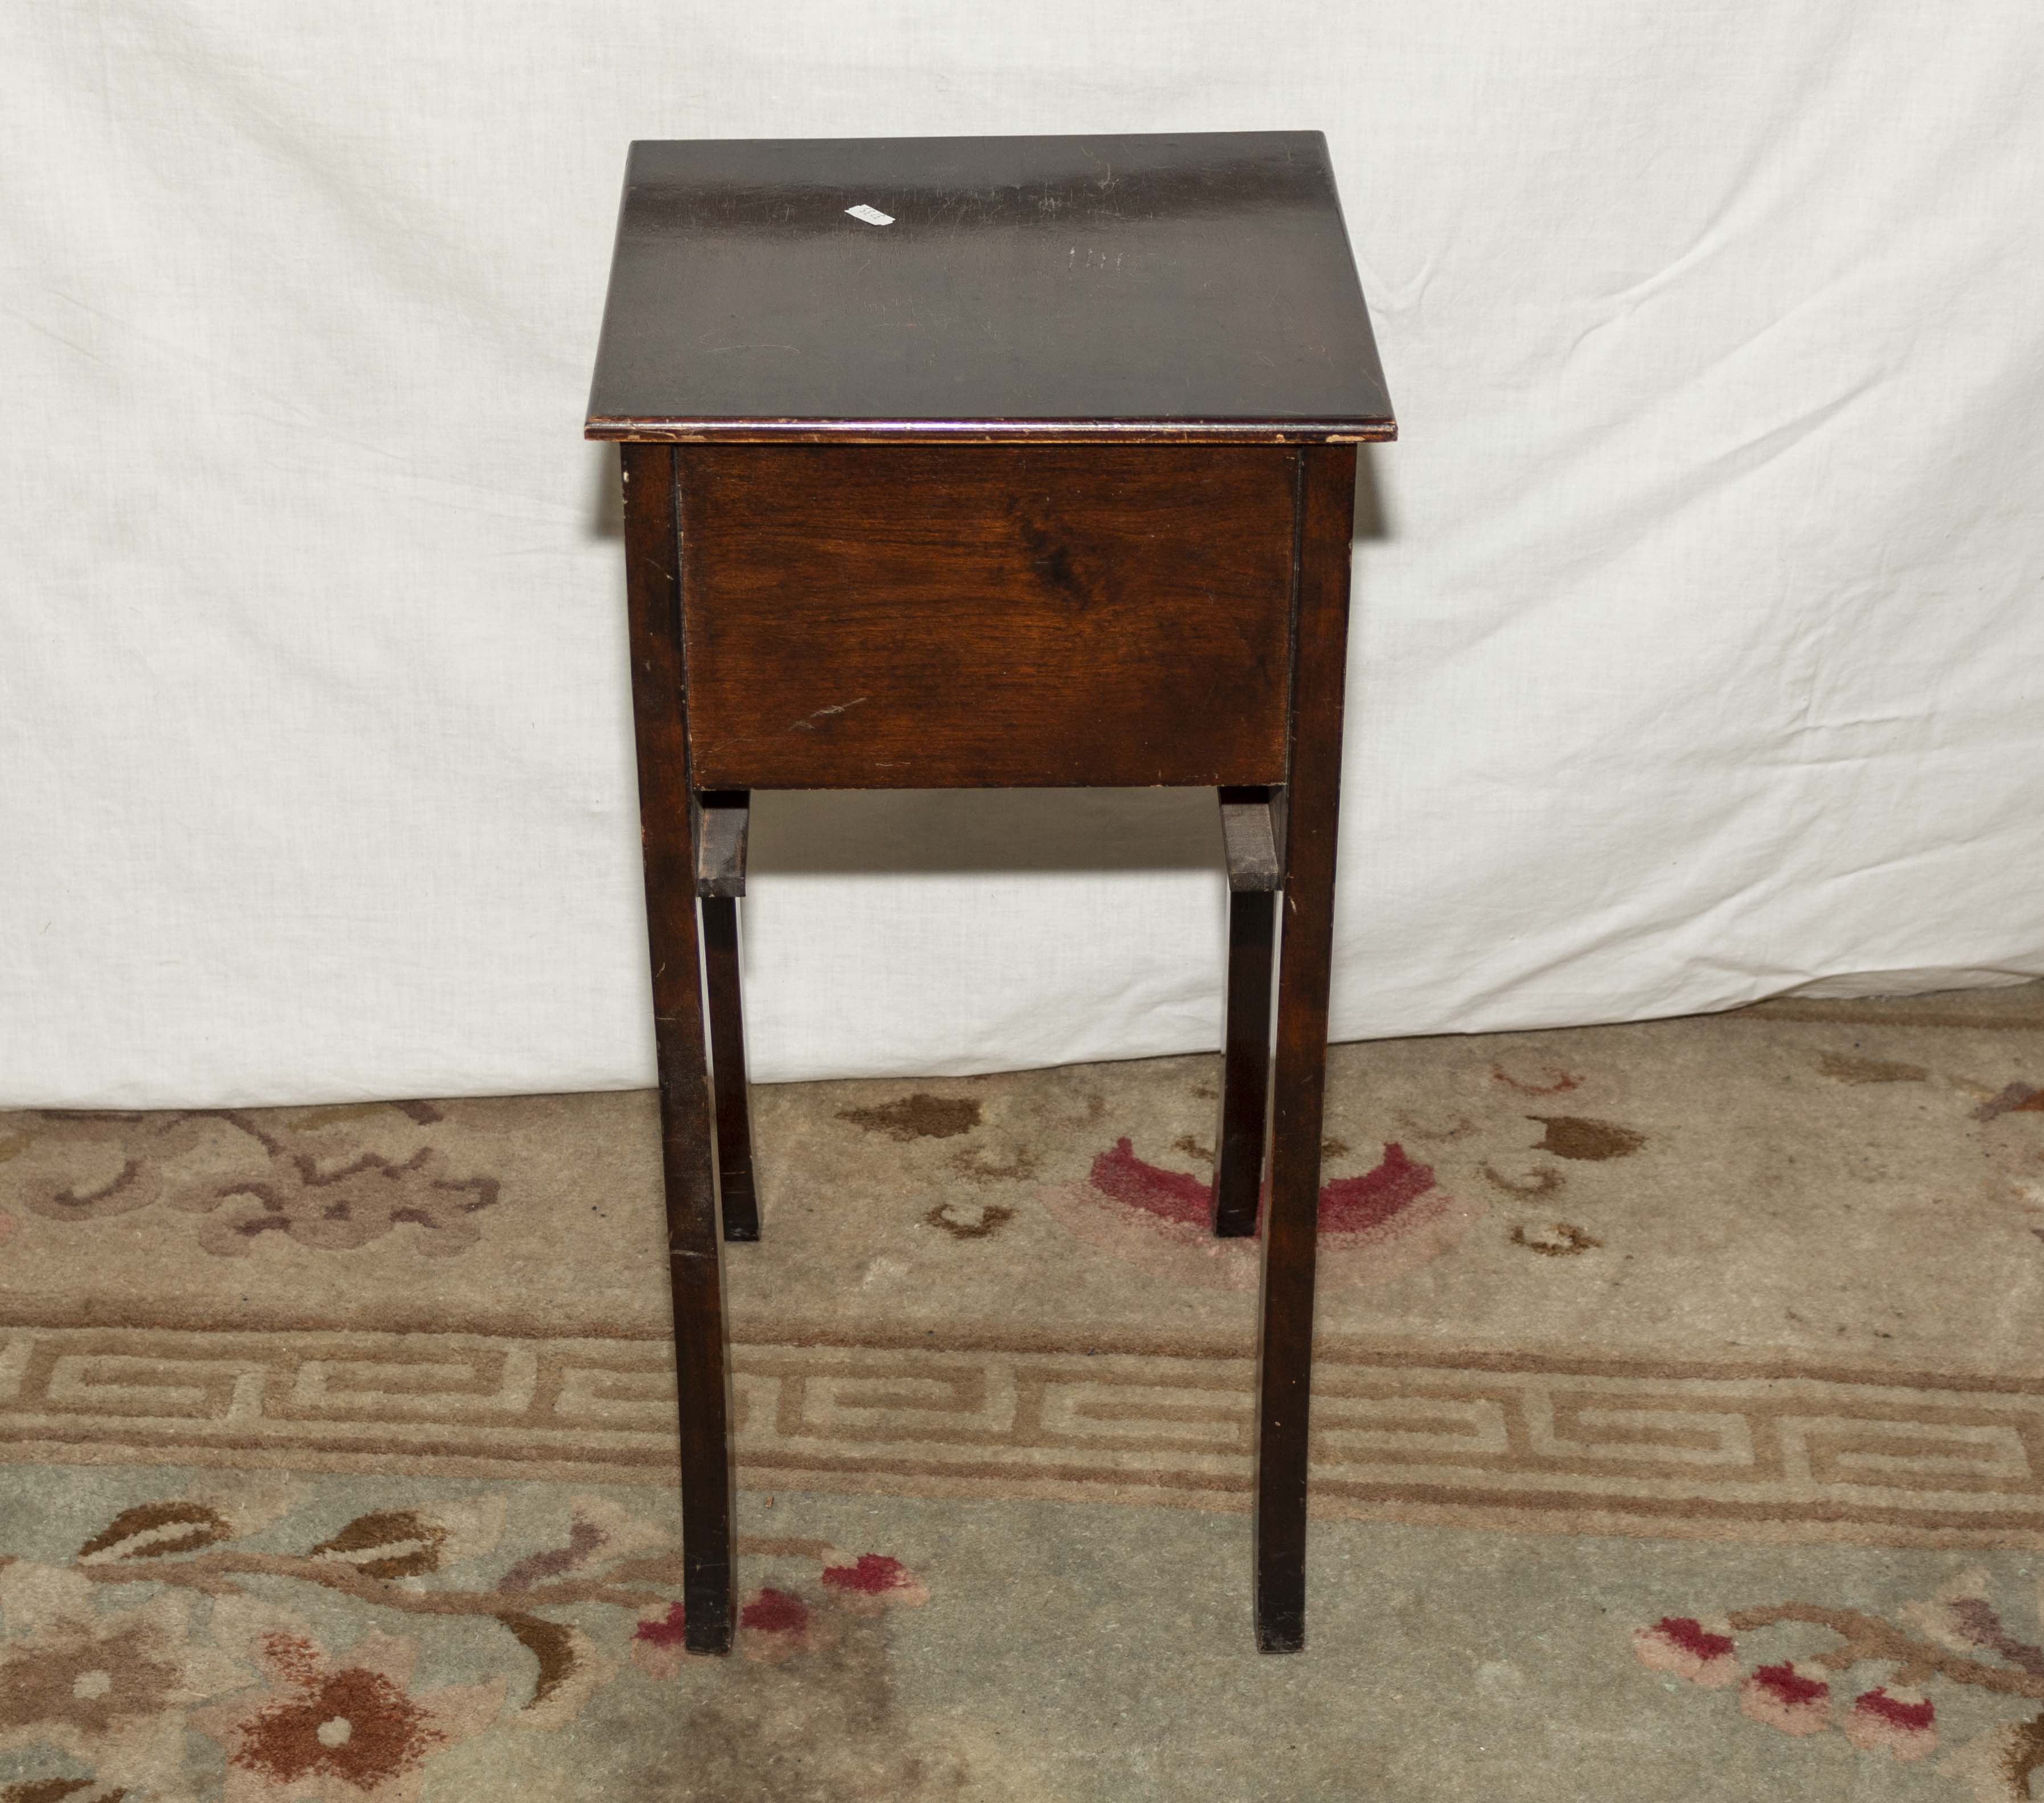 A sewing table